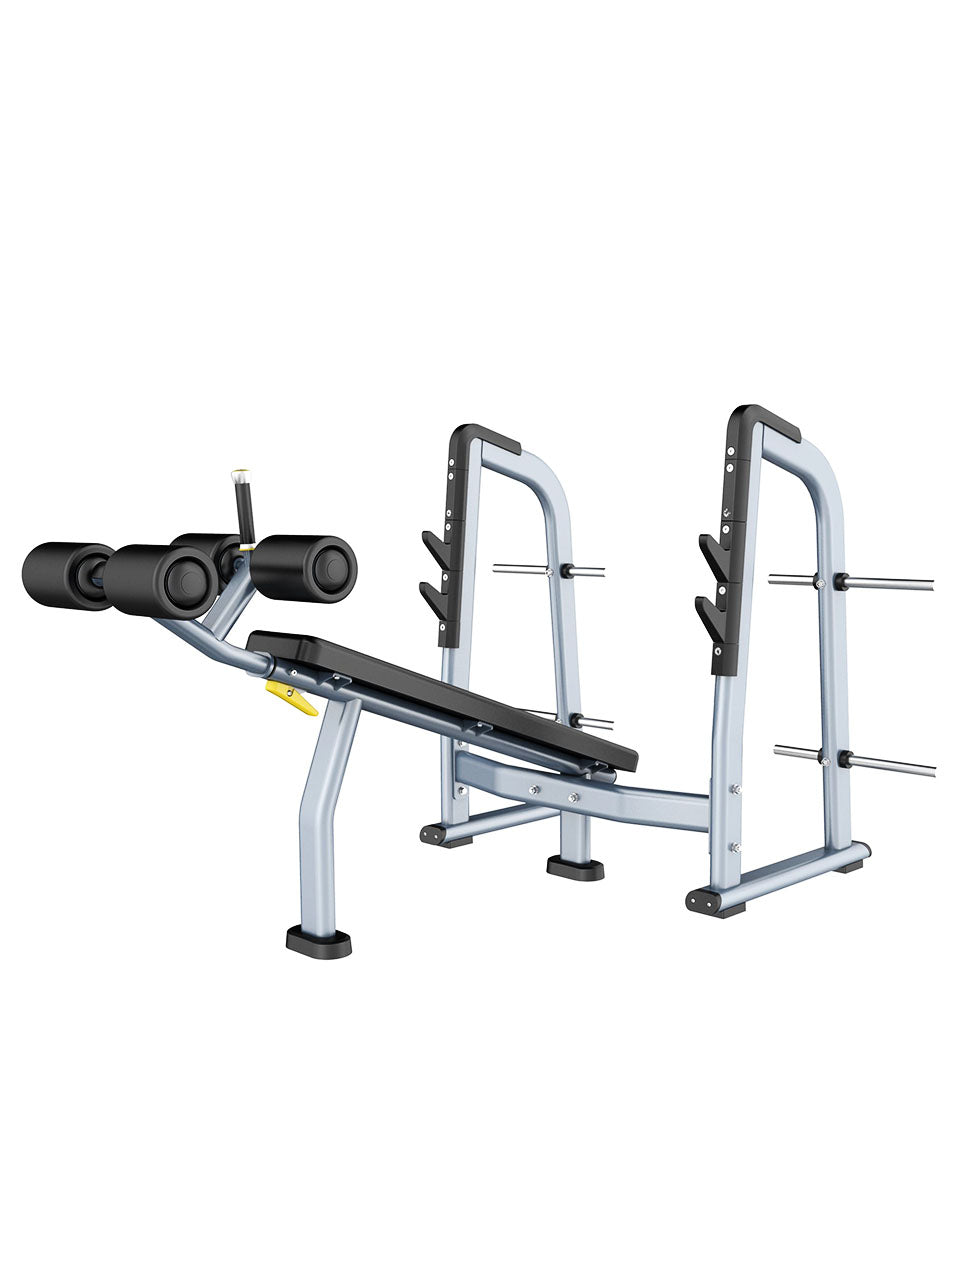 1441 Fitness Olympic Decline Bench - 41FF41